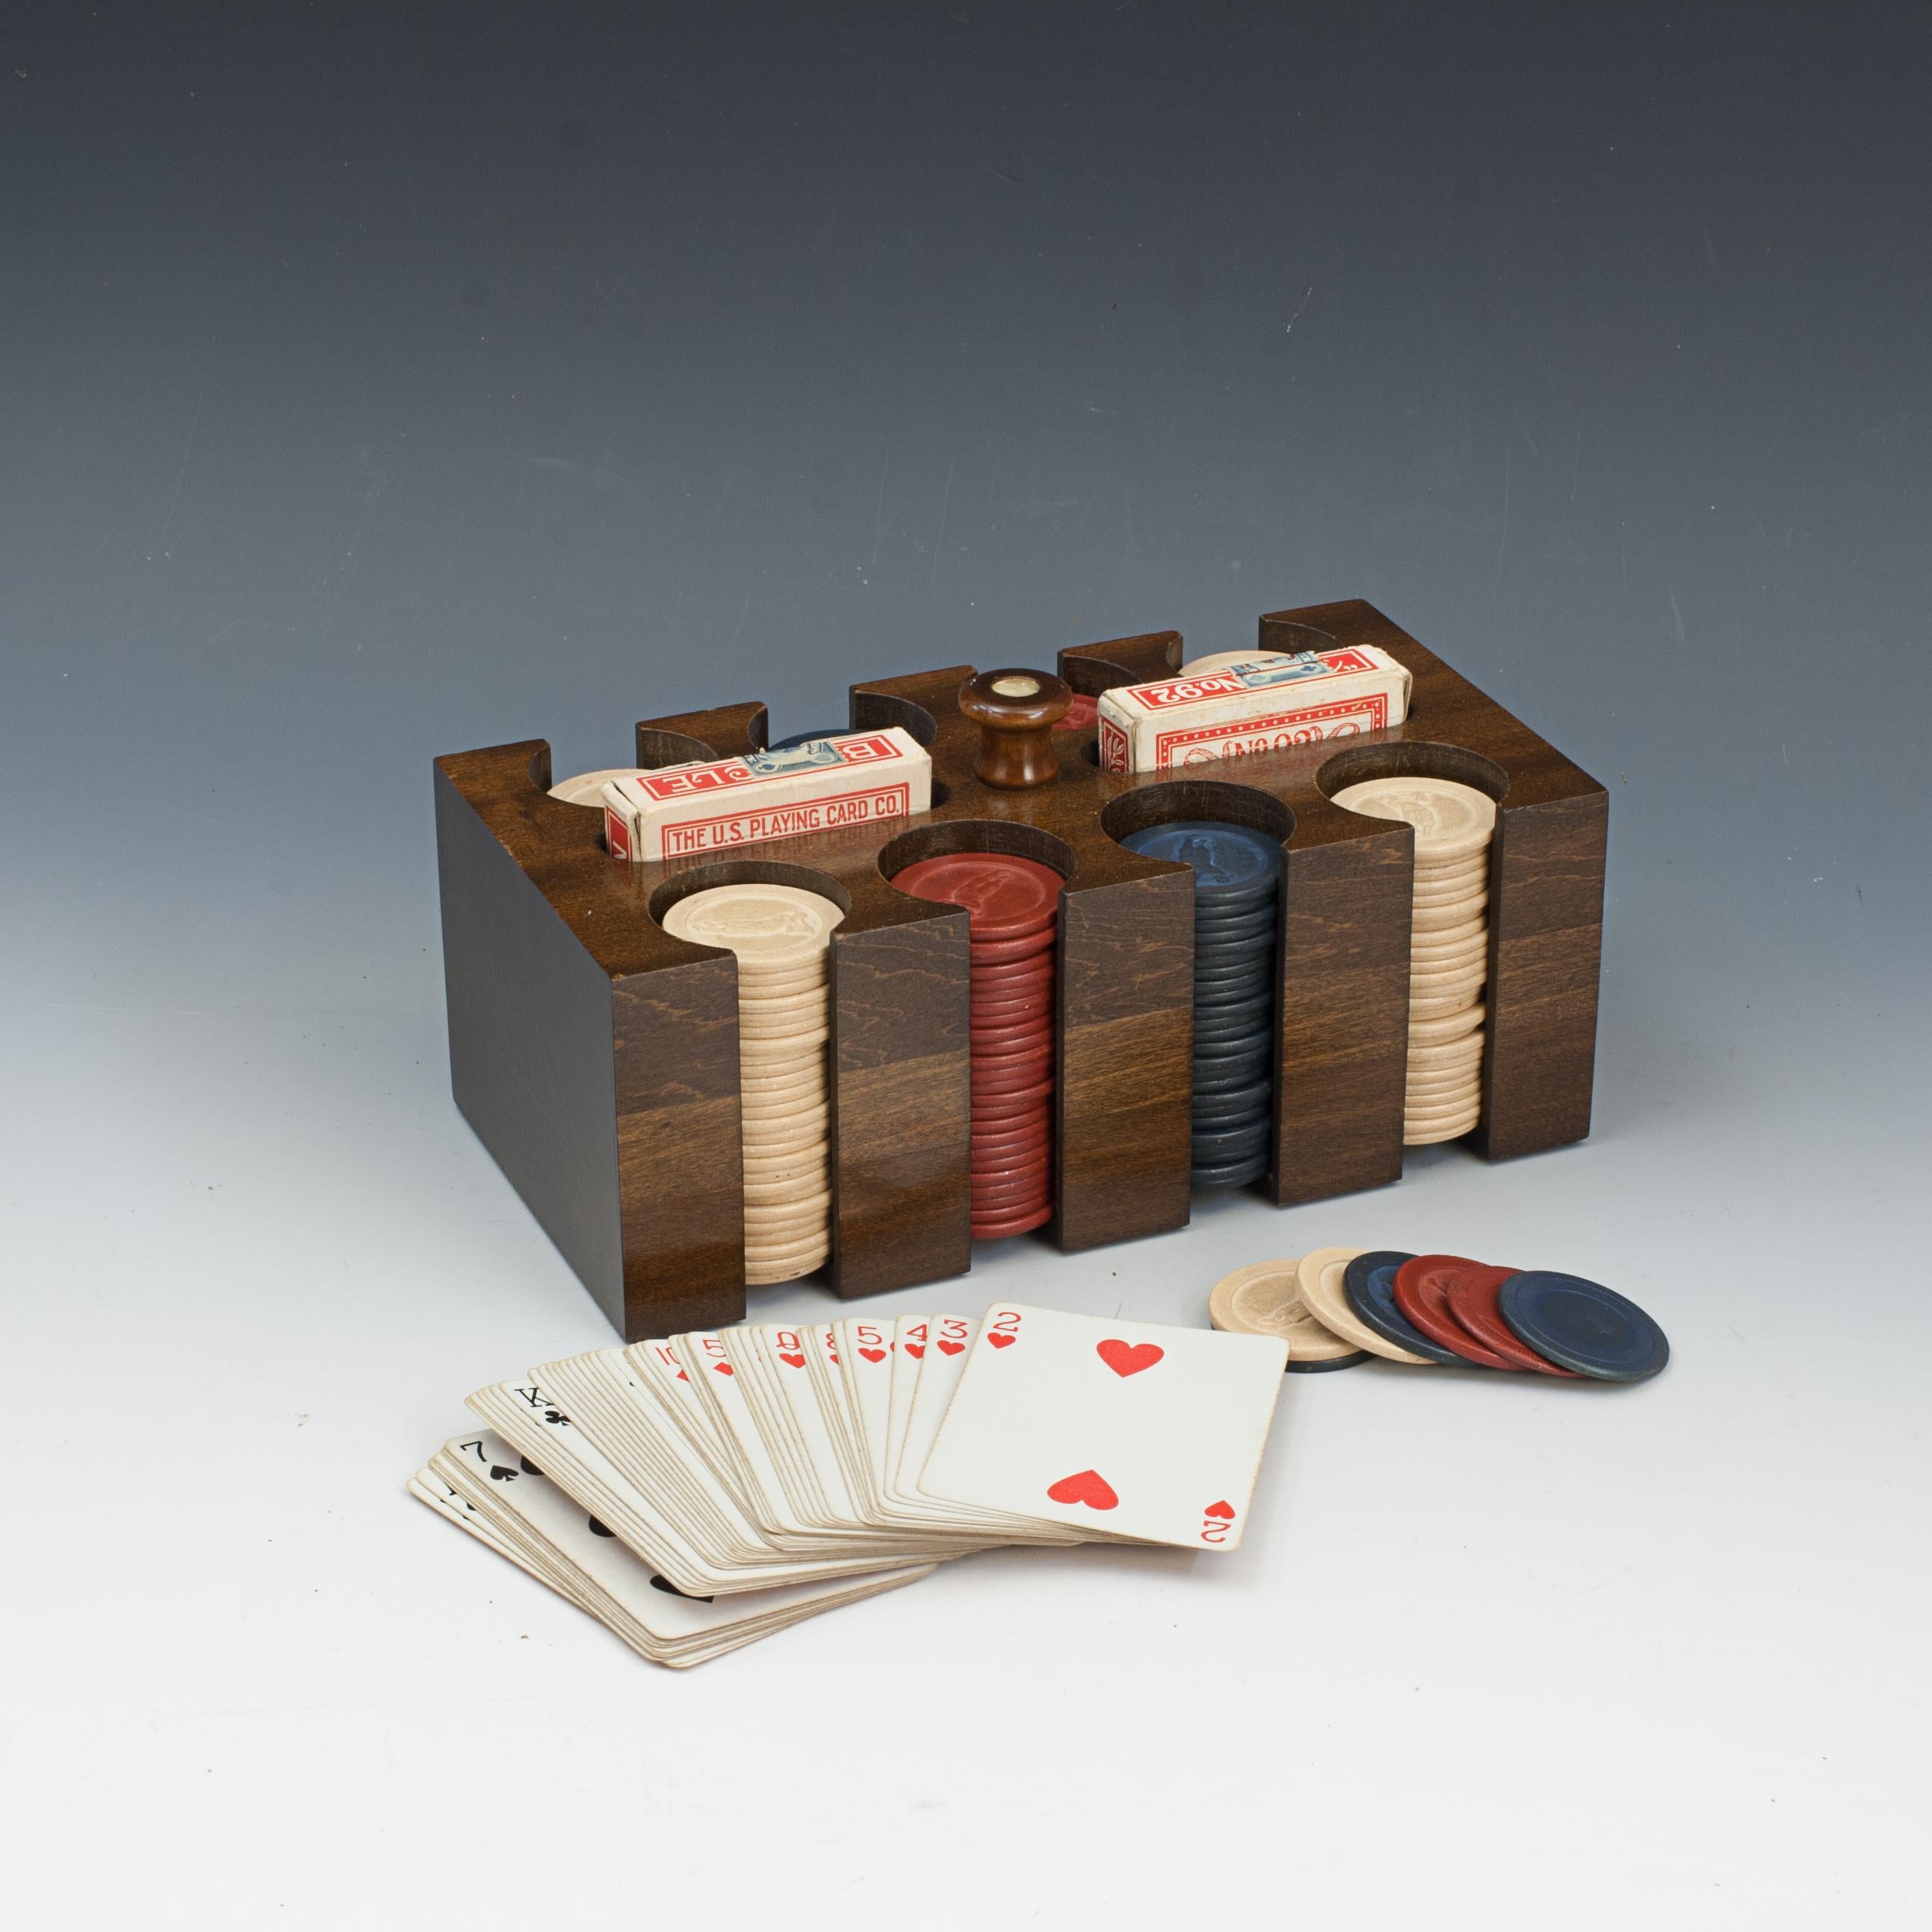 Vintage Bobby Jones Gaming Chips and Container.
A nice set of gambling counters (poker, gambling, gaming chips) in a rectangular wooden keeper. The carrier contains 8 individual circular slots containing coloured gaming chips (50 red, 51 dark blue &